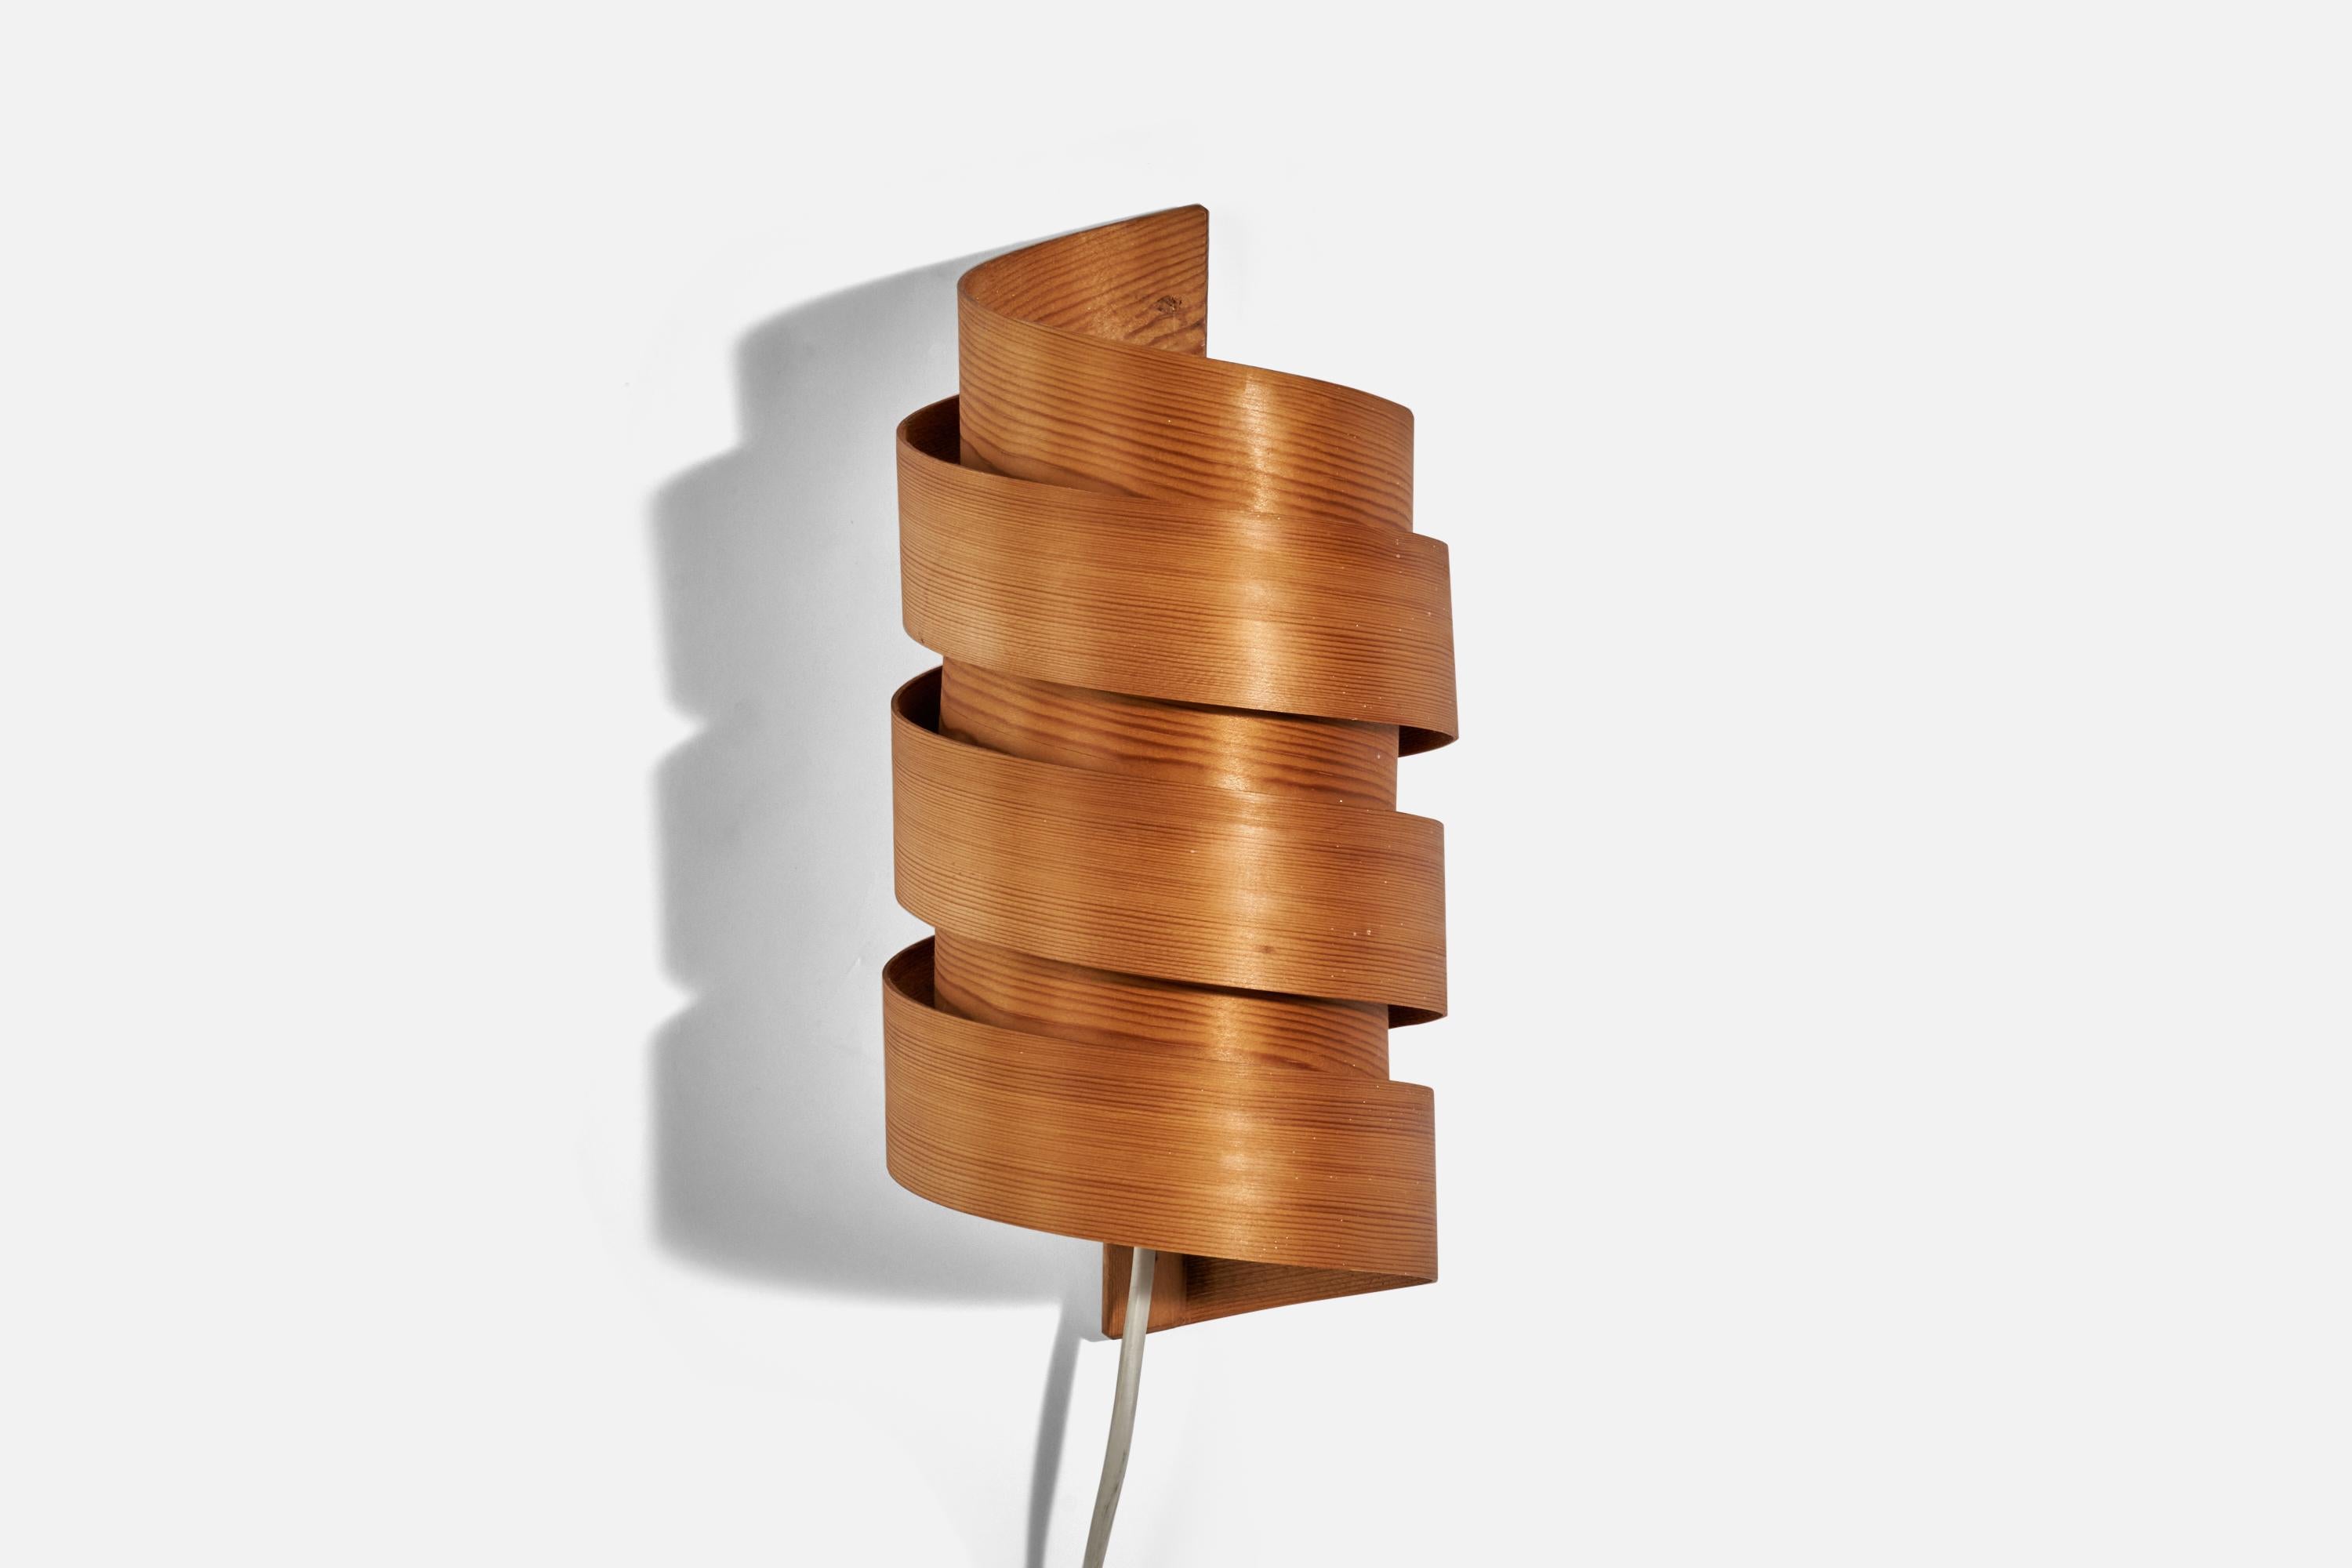 A pine and moulded pine-veneer sconce / wall light designed and produced in Sweden, 1970s.

Dimensions of Back Plate (inches) : 10.75 x 0.80 x 0.36 (height x width x depth)

Socket takes E-14 bulb.

There is no maximum wattage stated on the